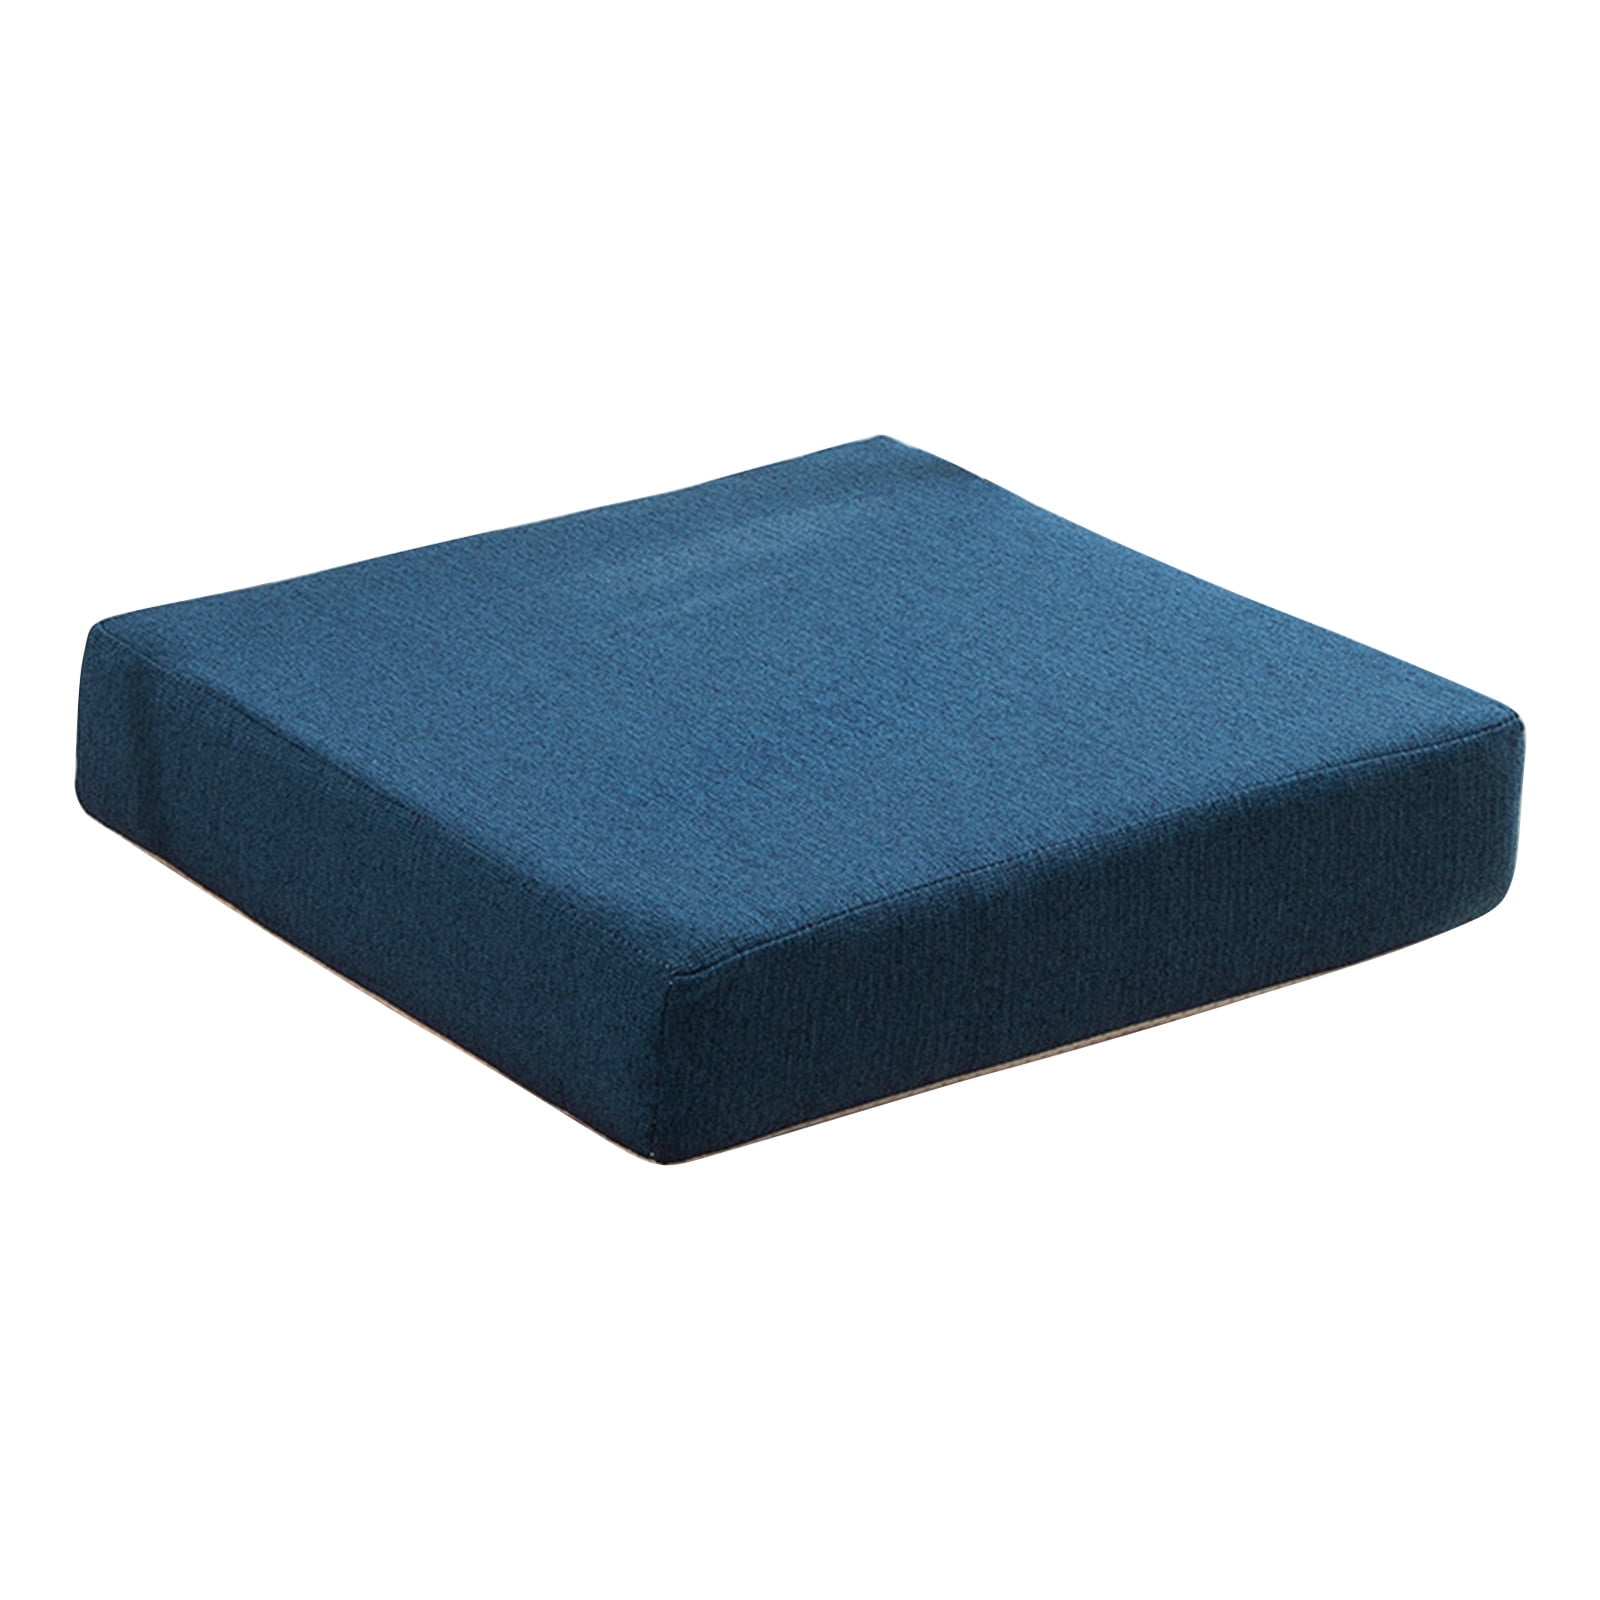 COMFORTANZA Chair Seat Cushion - 16x16x5 Memory Foam Square Thick Non-Slip  Pads for Kitchen, Dining, Office Chairs, Car Seats - Booster Cushion 